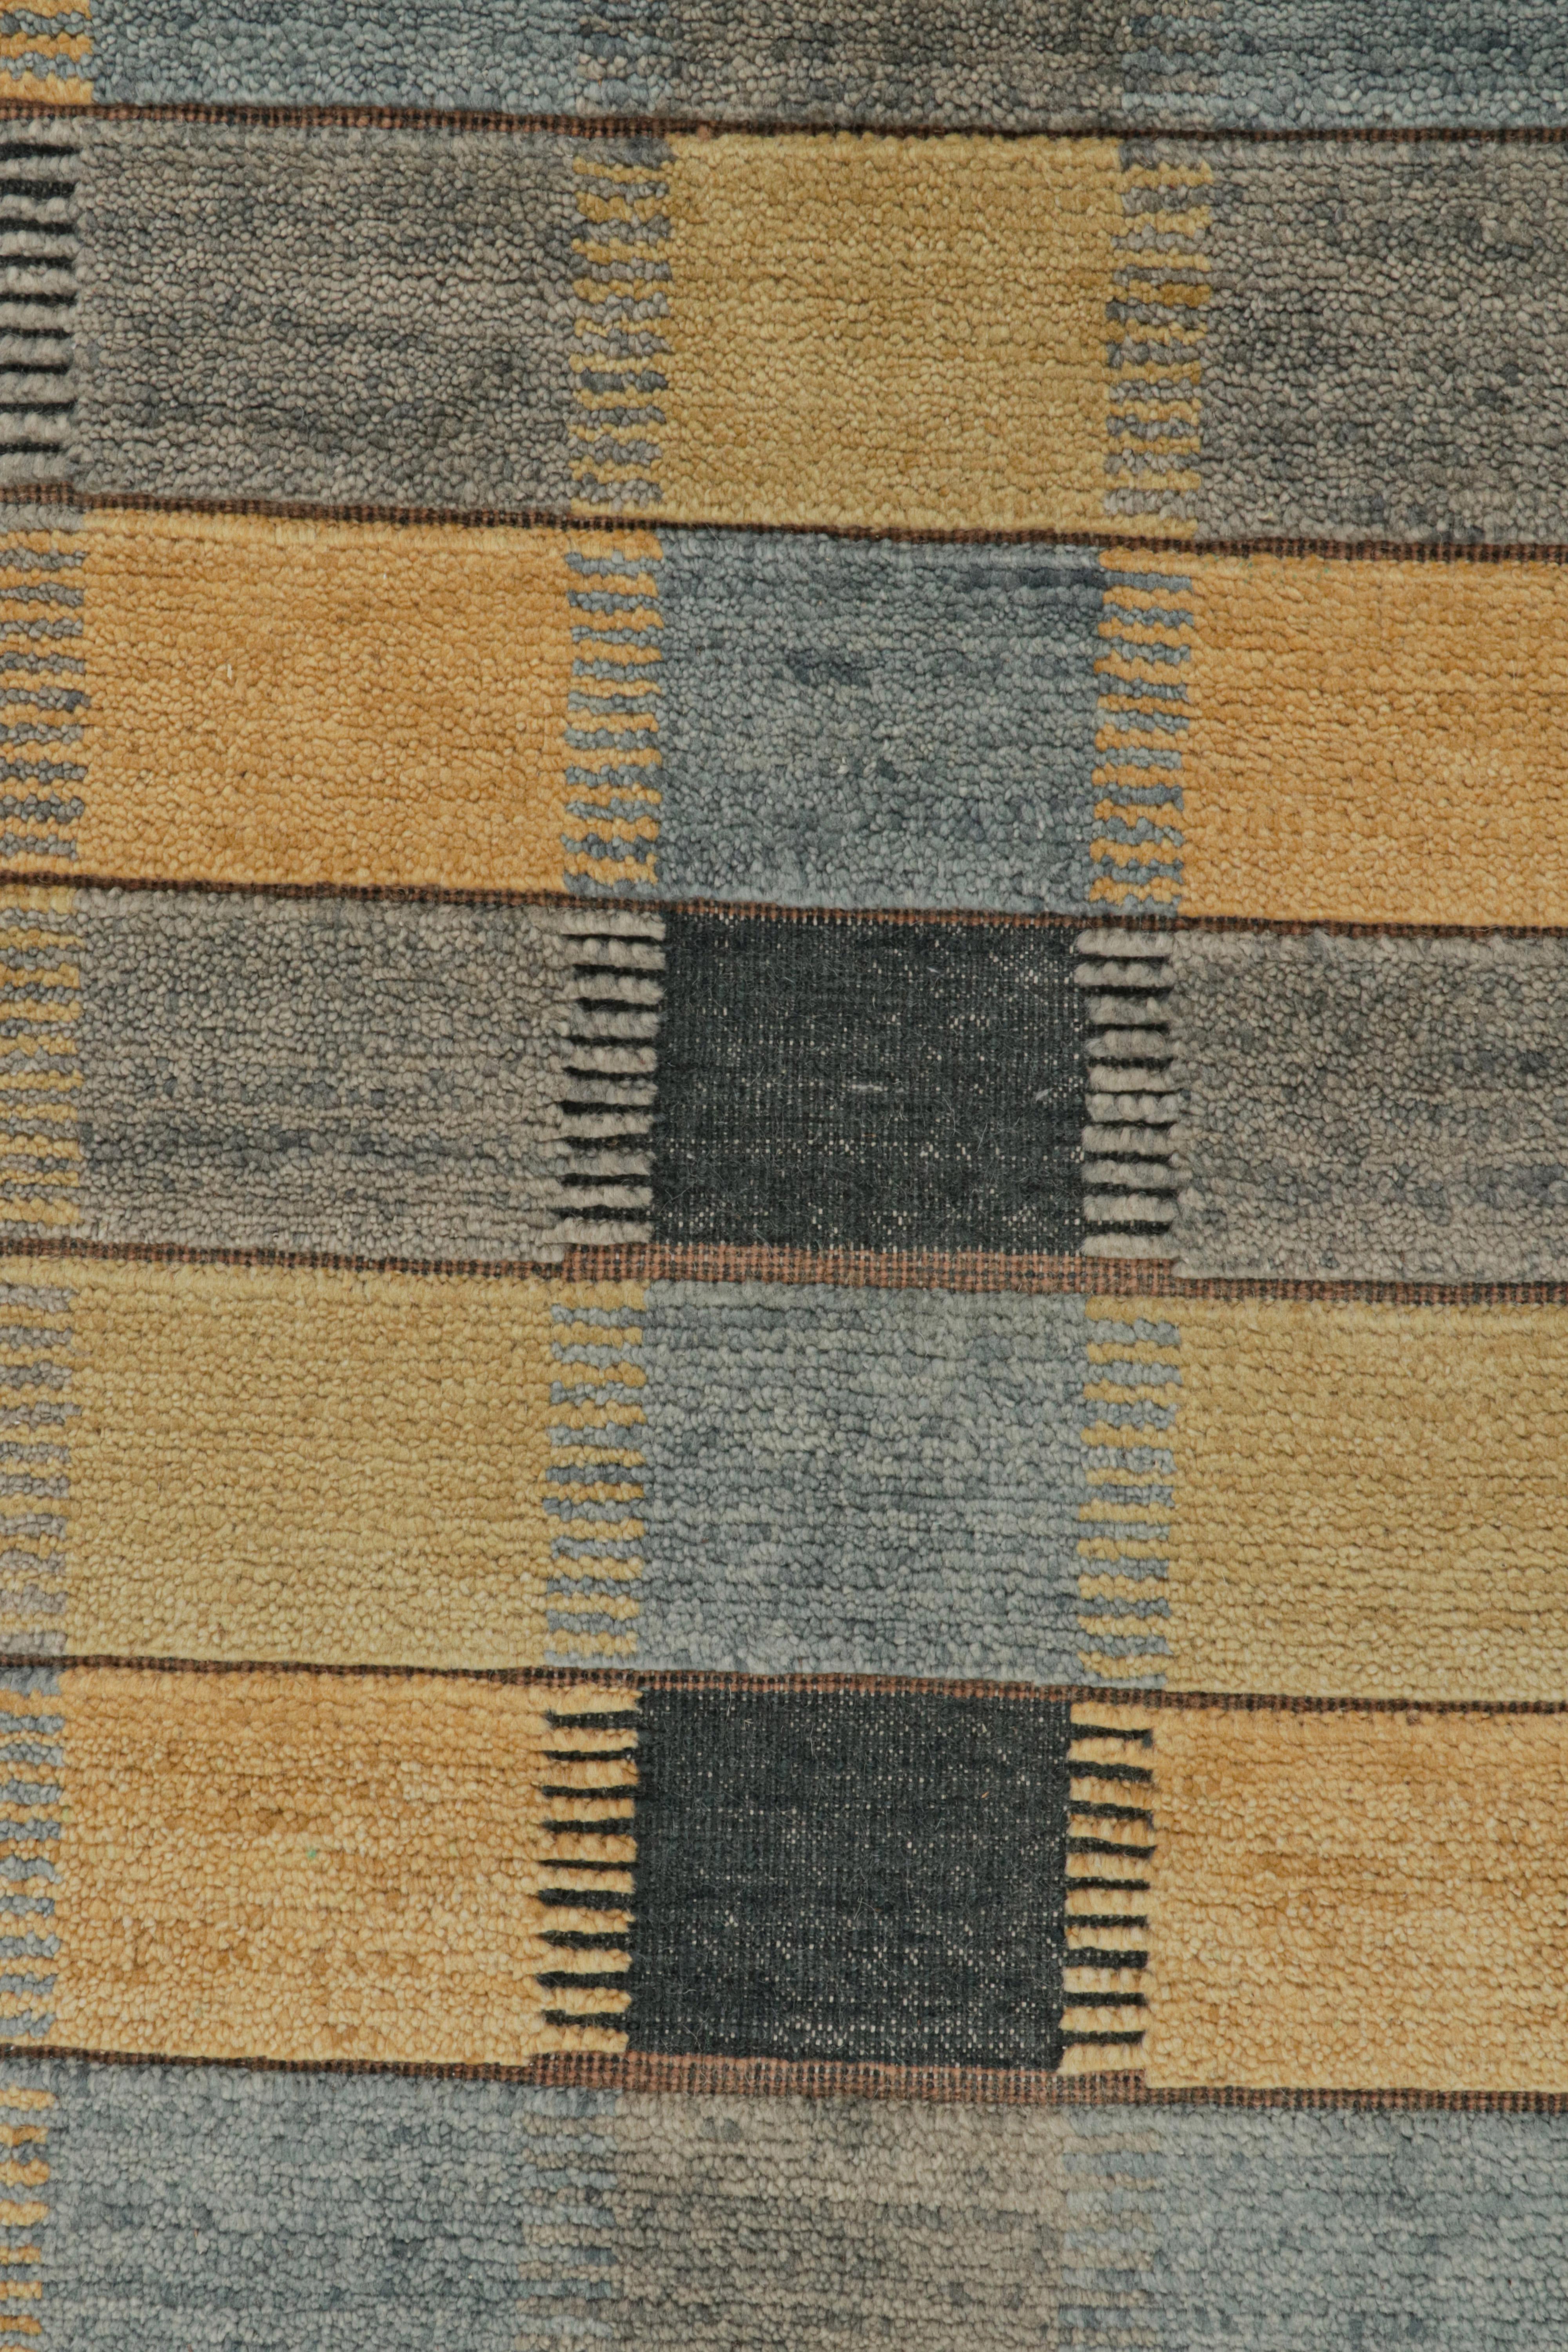 Rug & Kilim’s Scandinavian Style Rug in Blue, Black & Gold Patterns In New Condition For Sale In Long Island City, NY